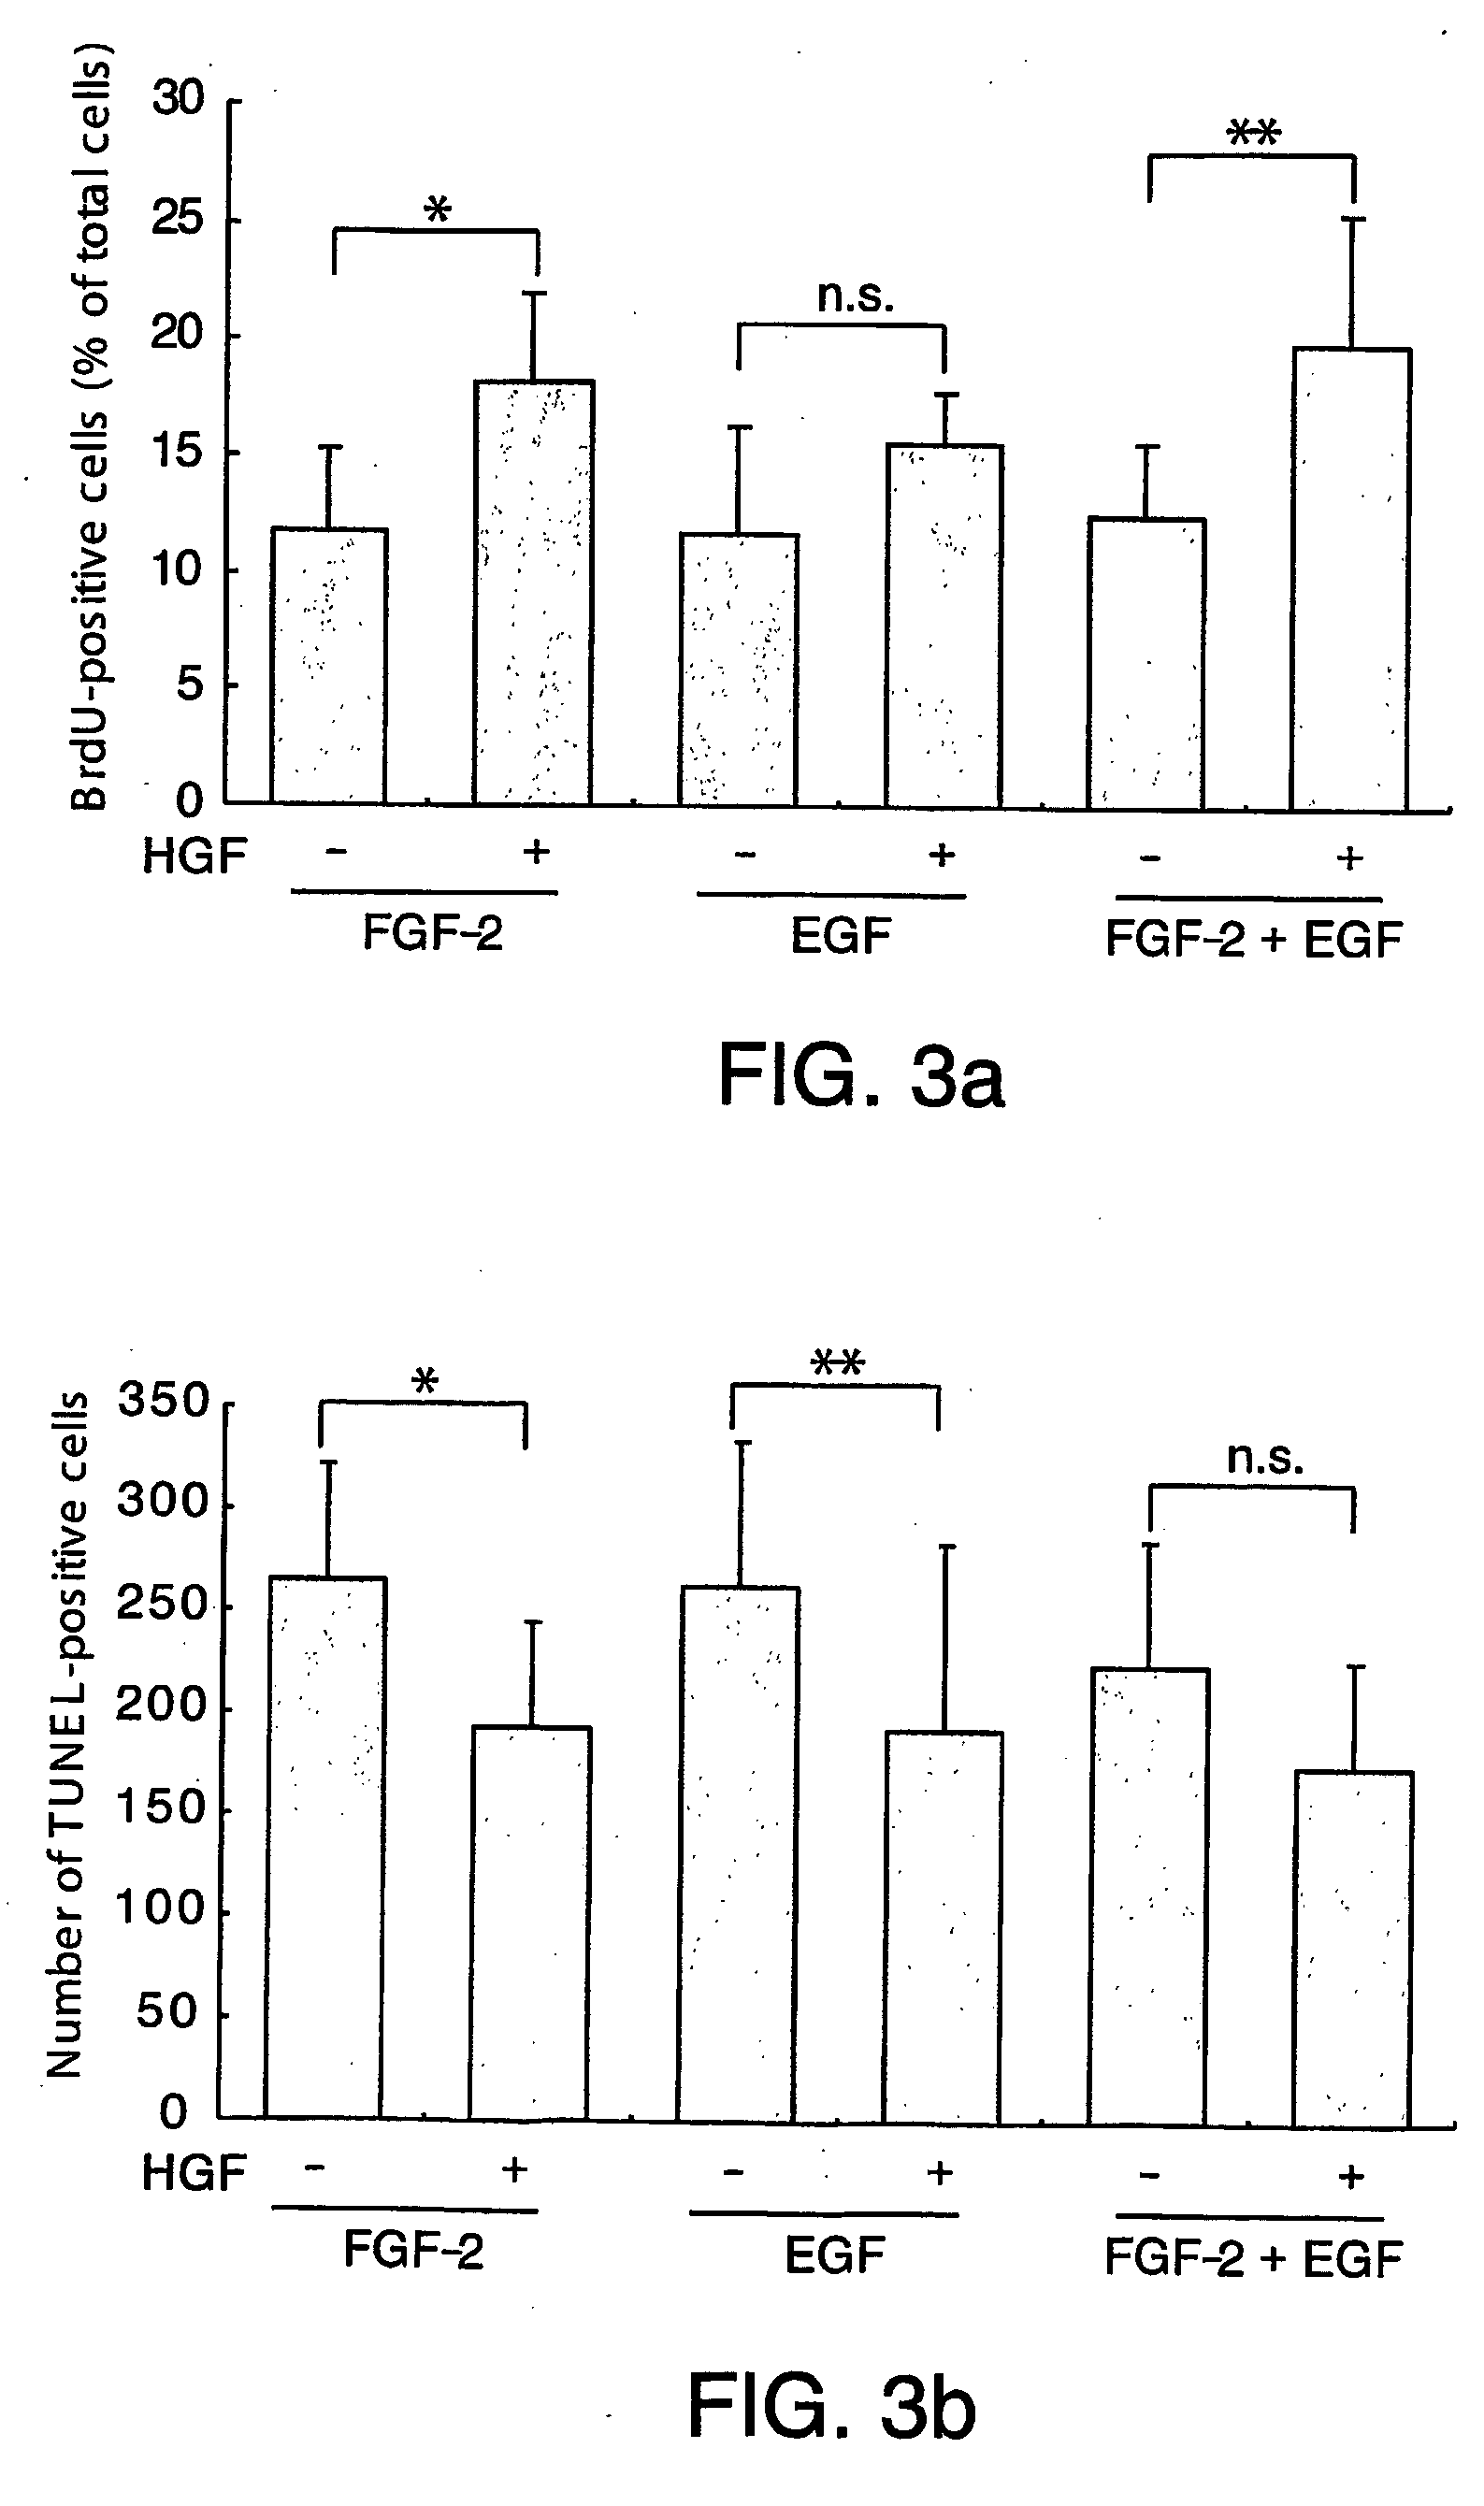 Method for culturing neural stem cells using hepatocyte growth factor